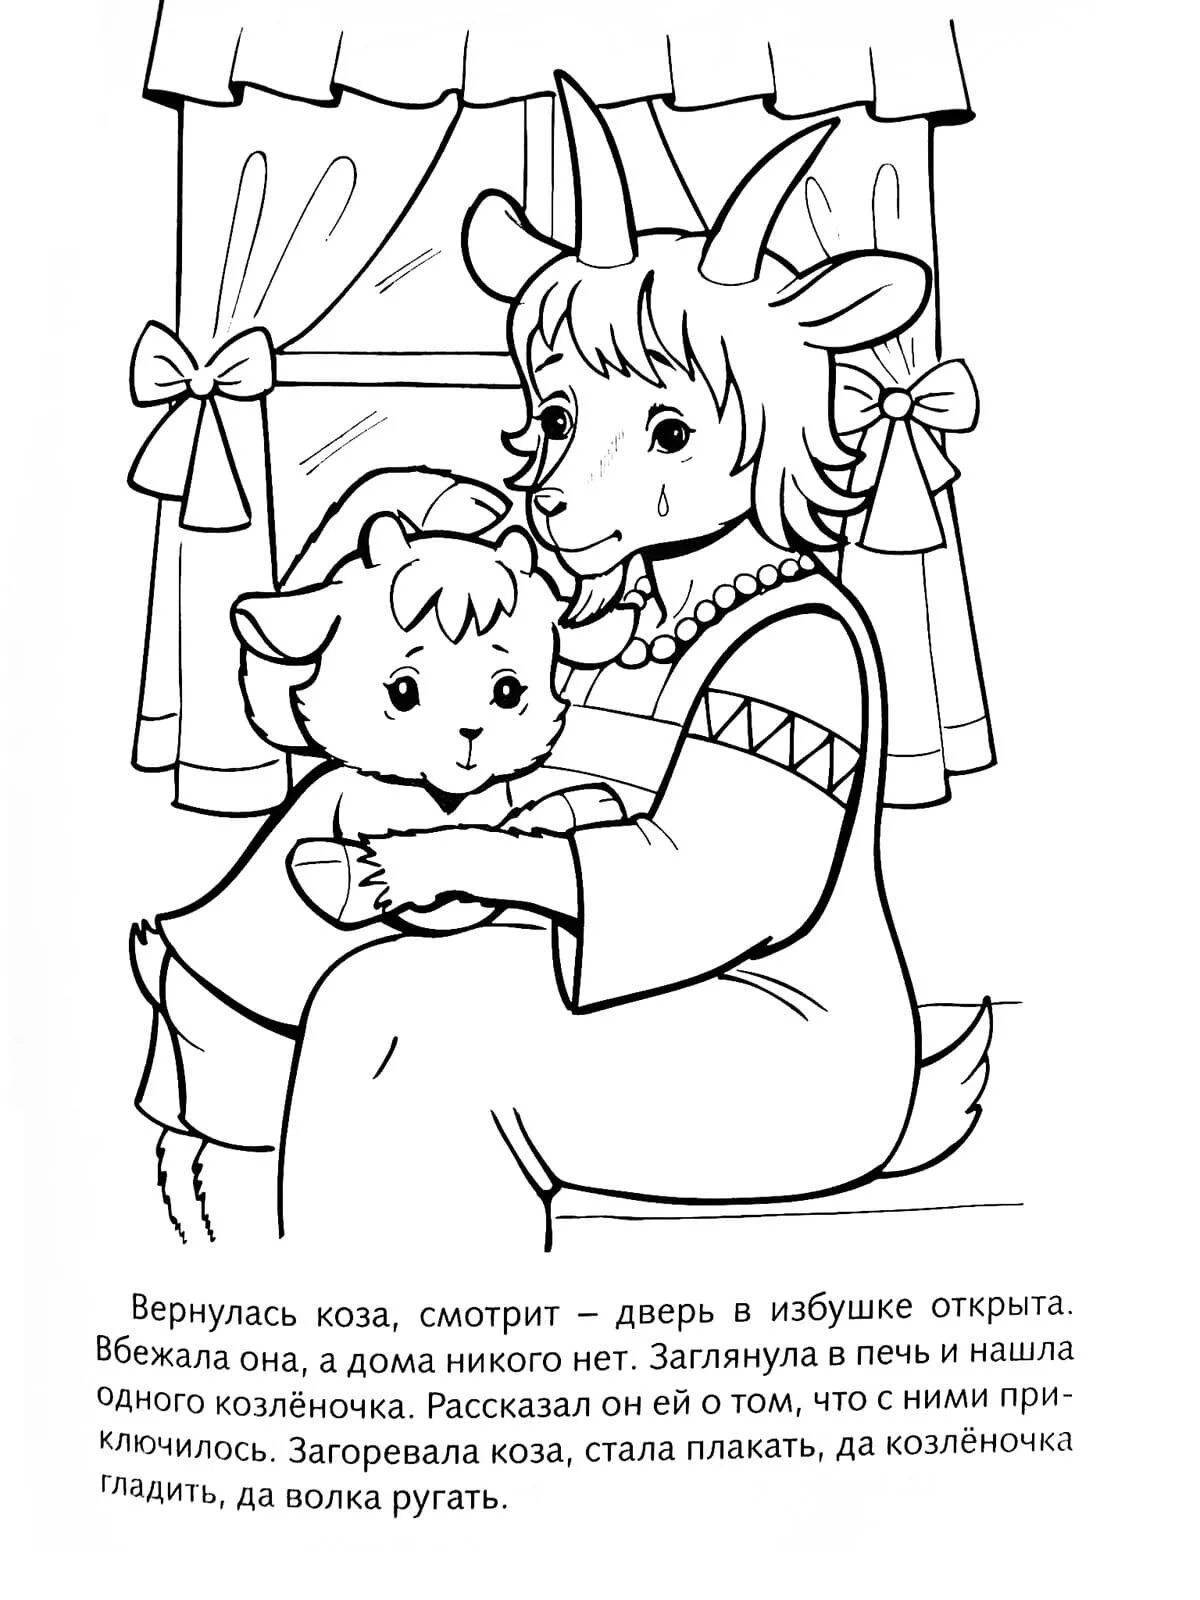 Adorable wolf and children coloring book